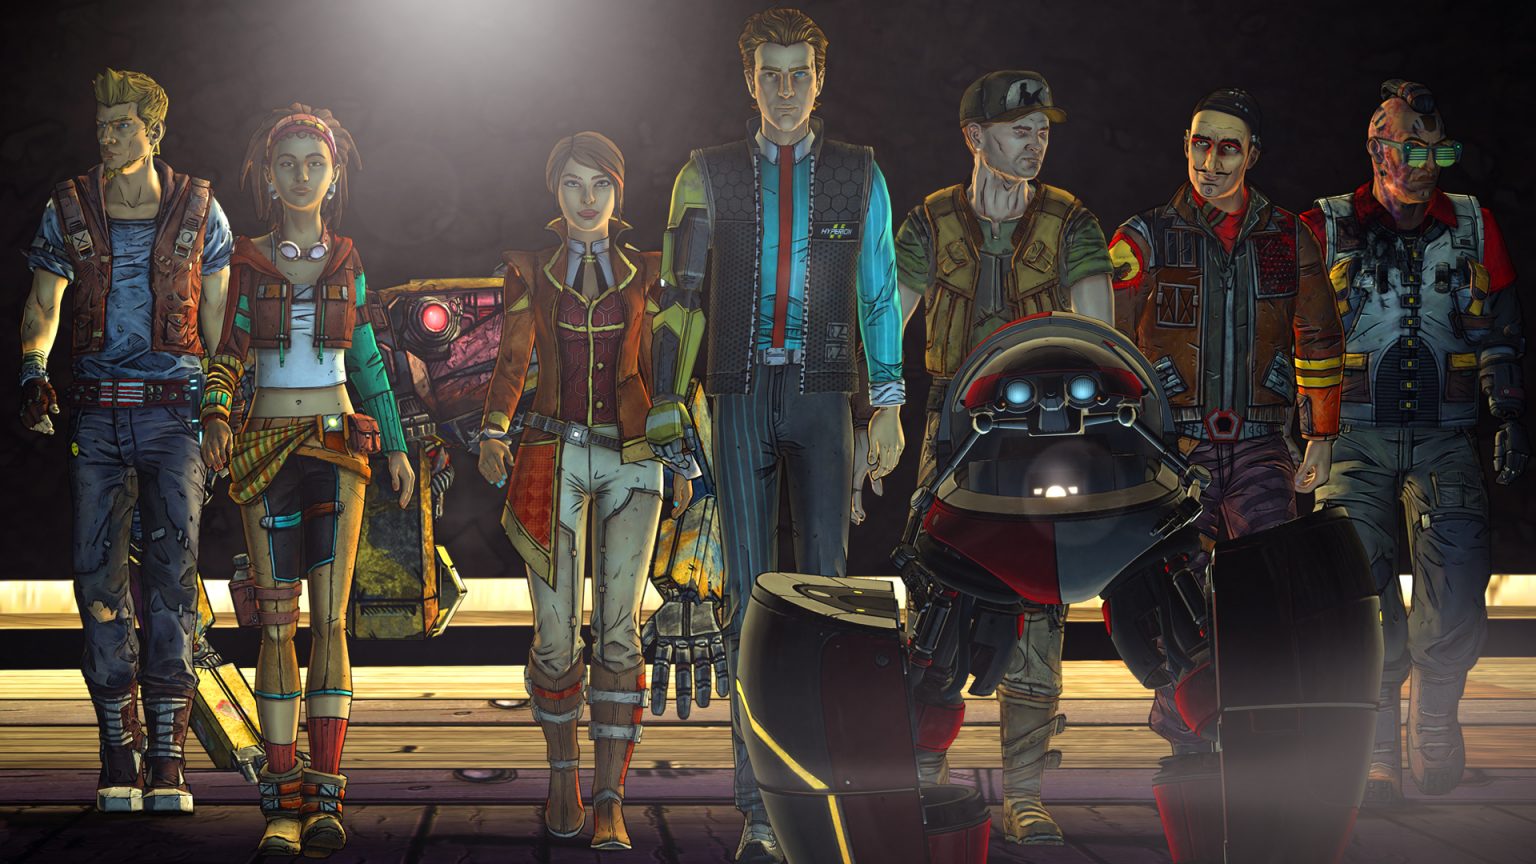 free download tales from the borderlands switch